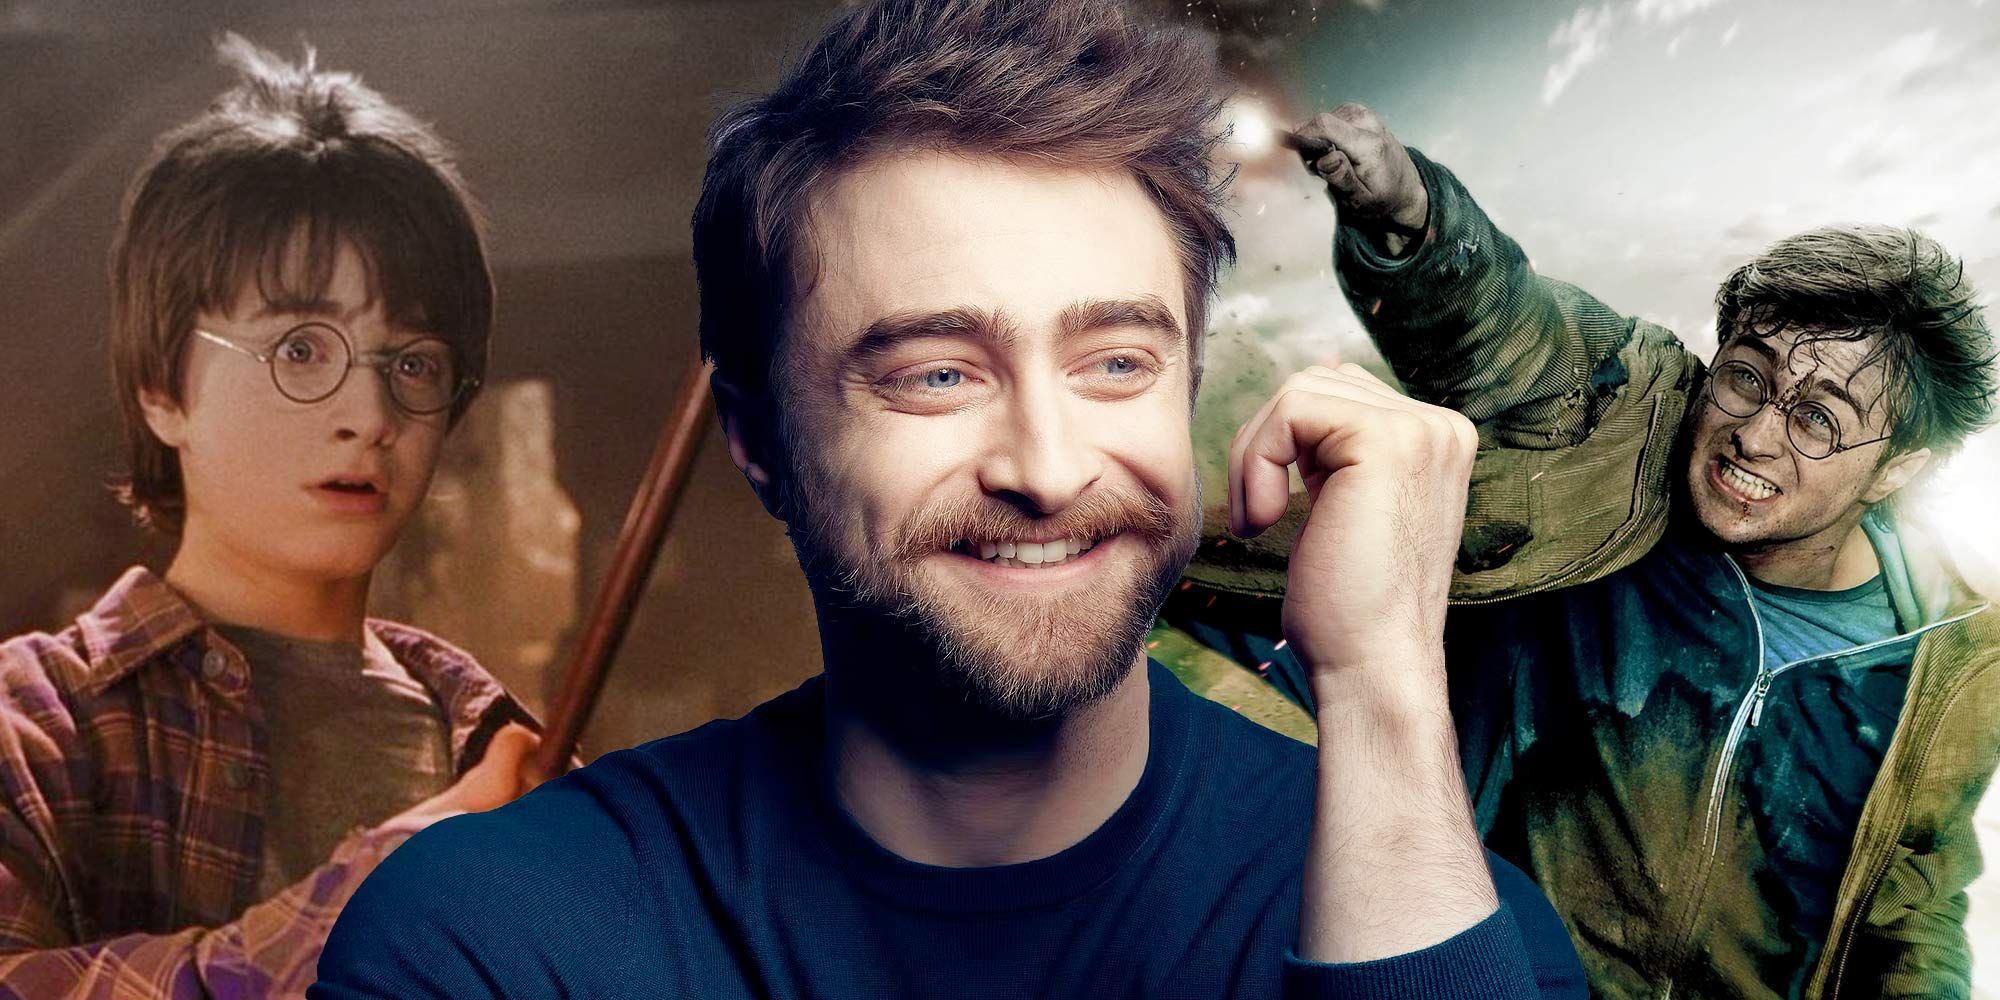 read-the-hilarious-reason-daniel-radcliffe-played-harry-potter-for-10